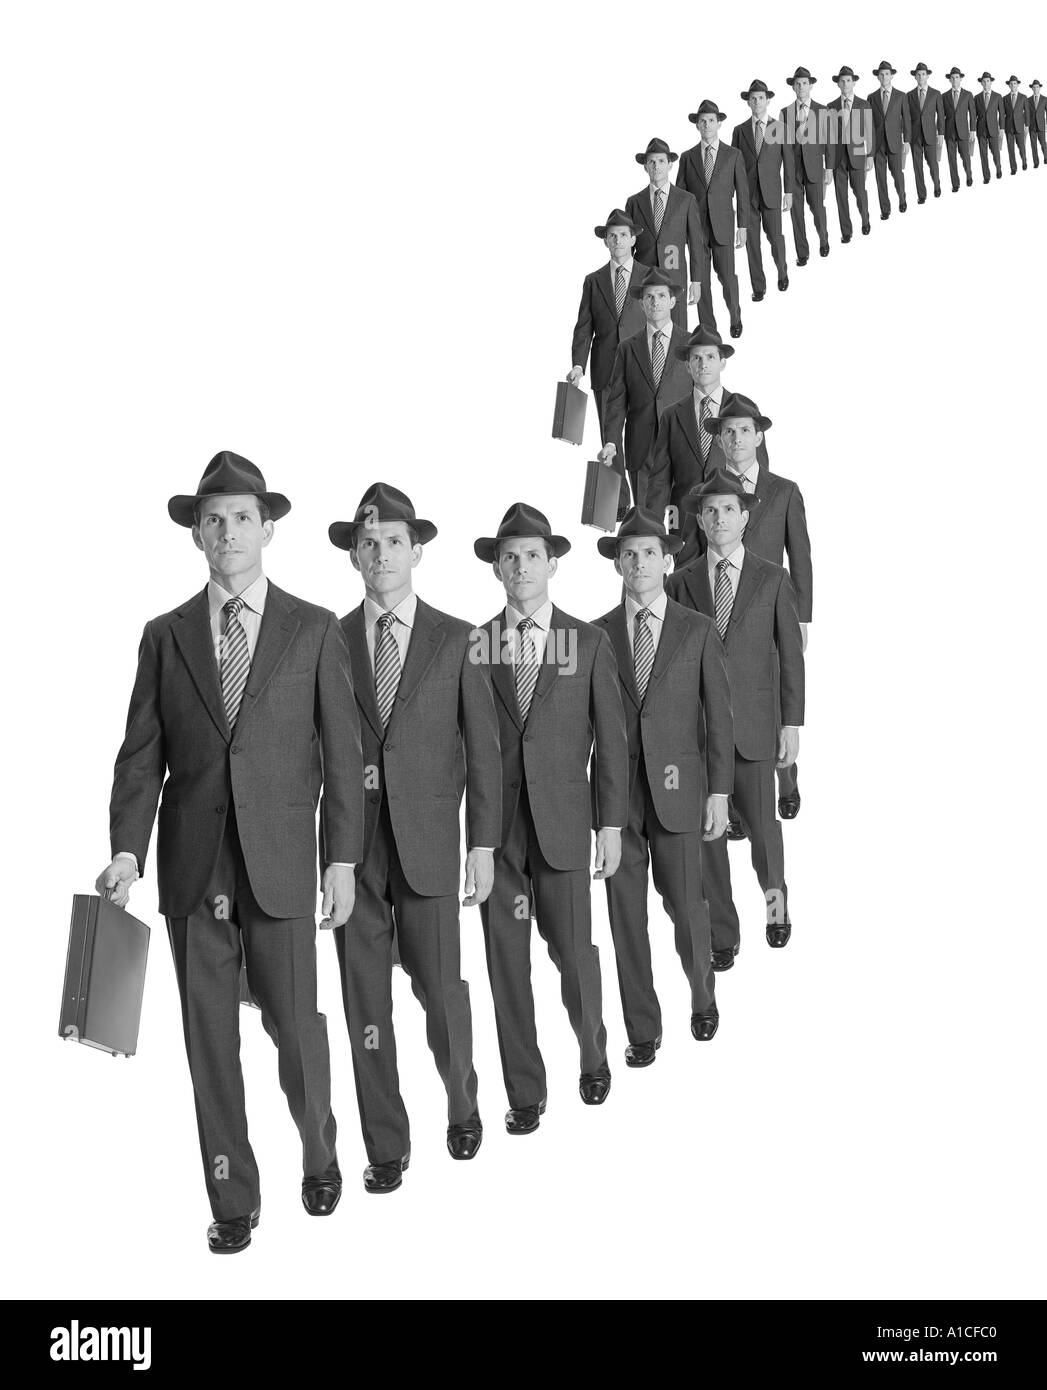 Row of stereotypical cloned businessman against white background Stock Photo